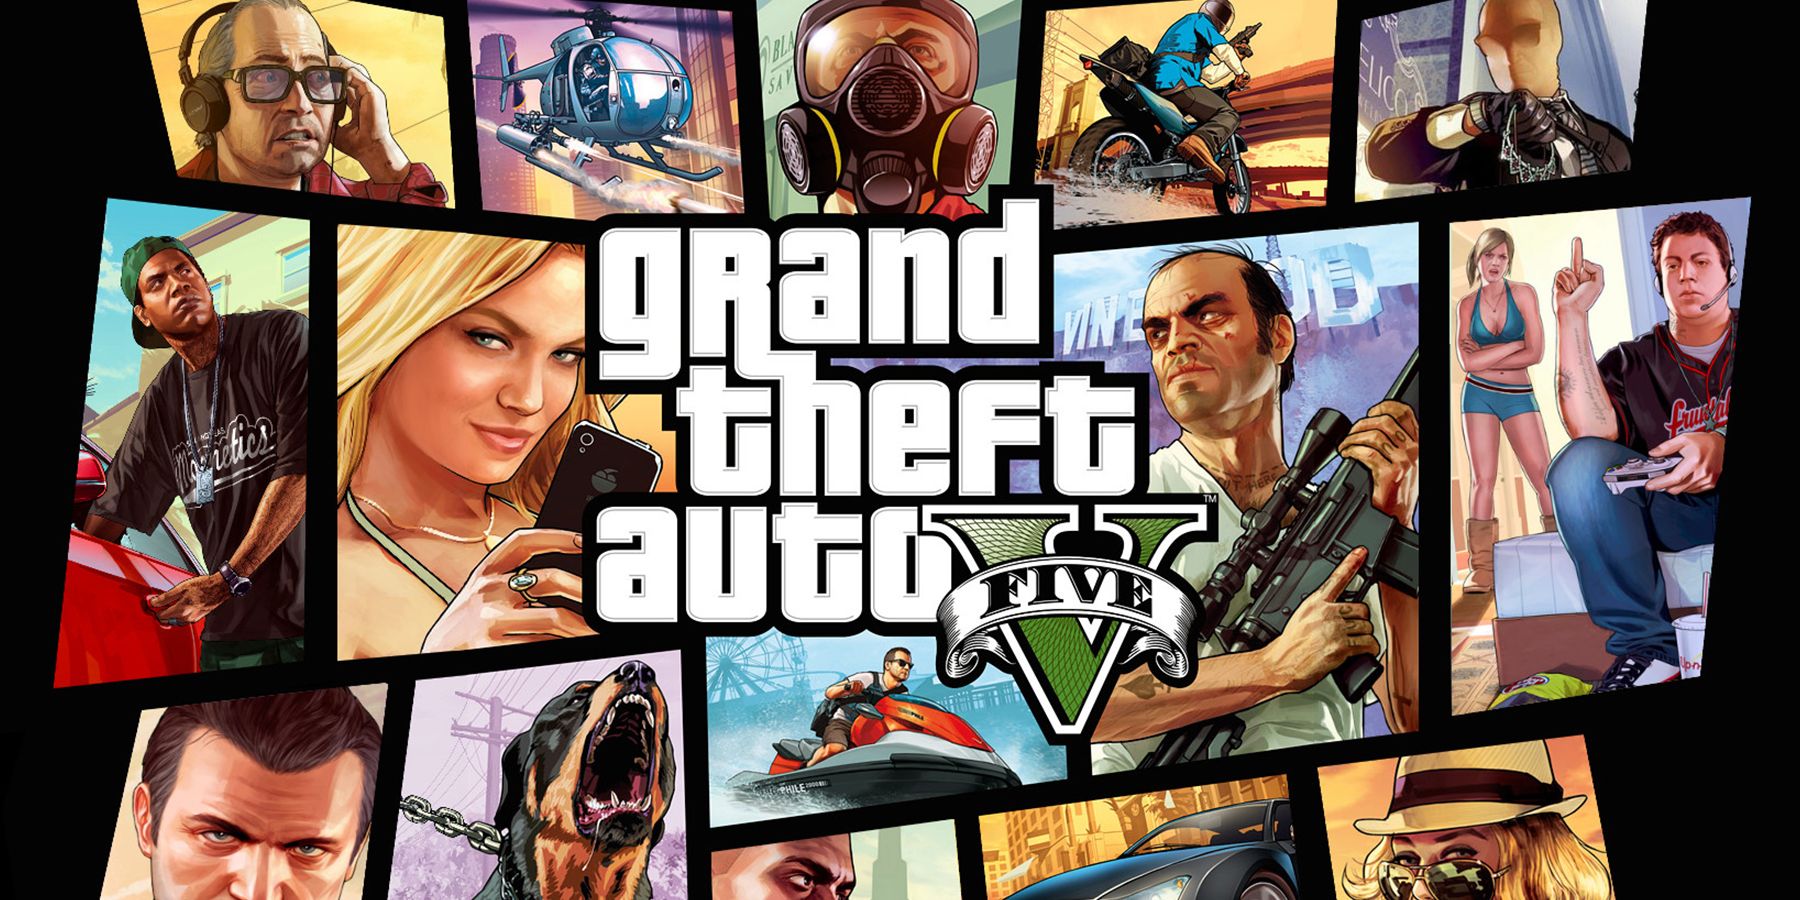 Grand Theft Auto V's main logo and promotional art